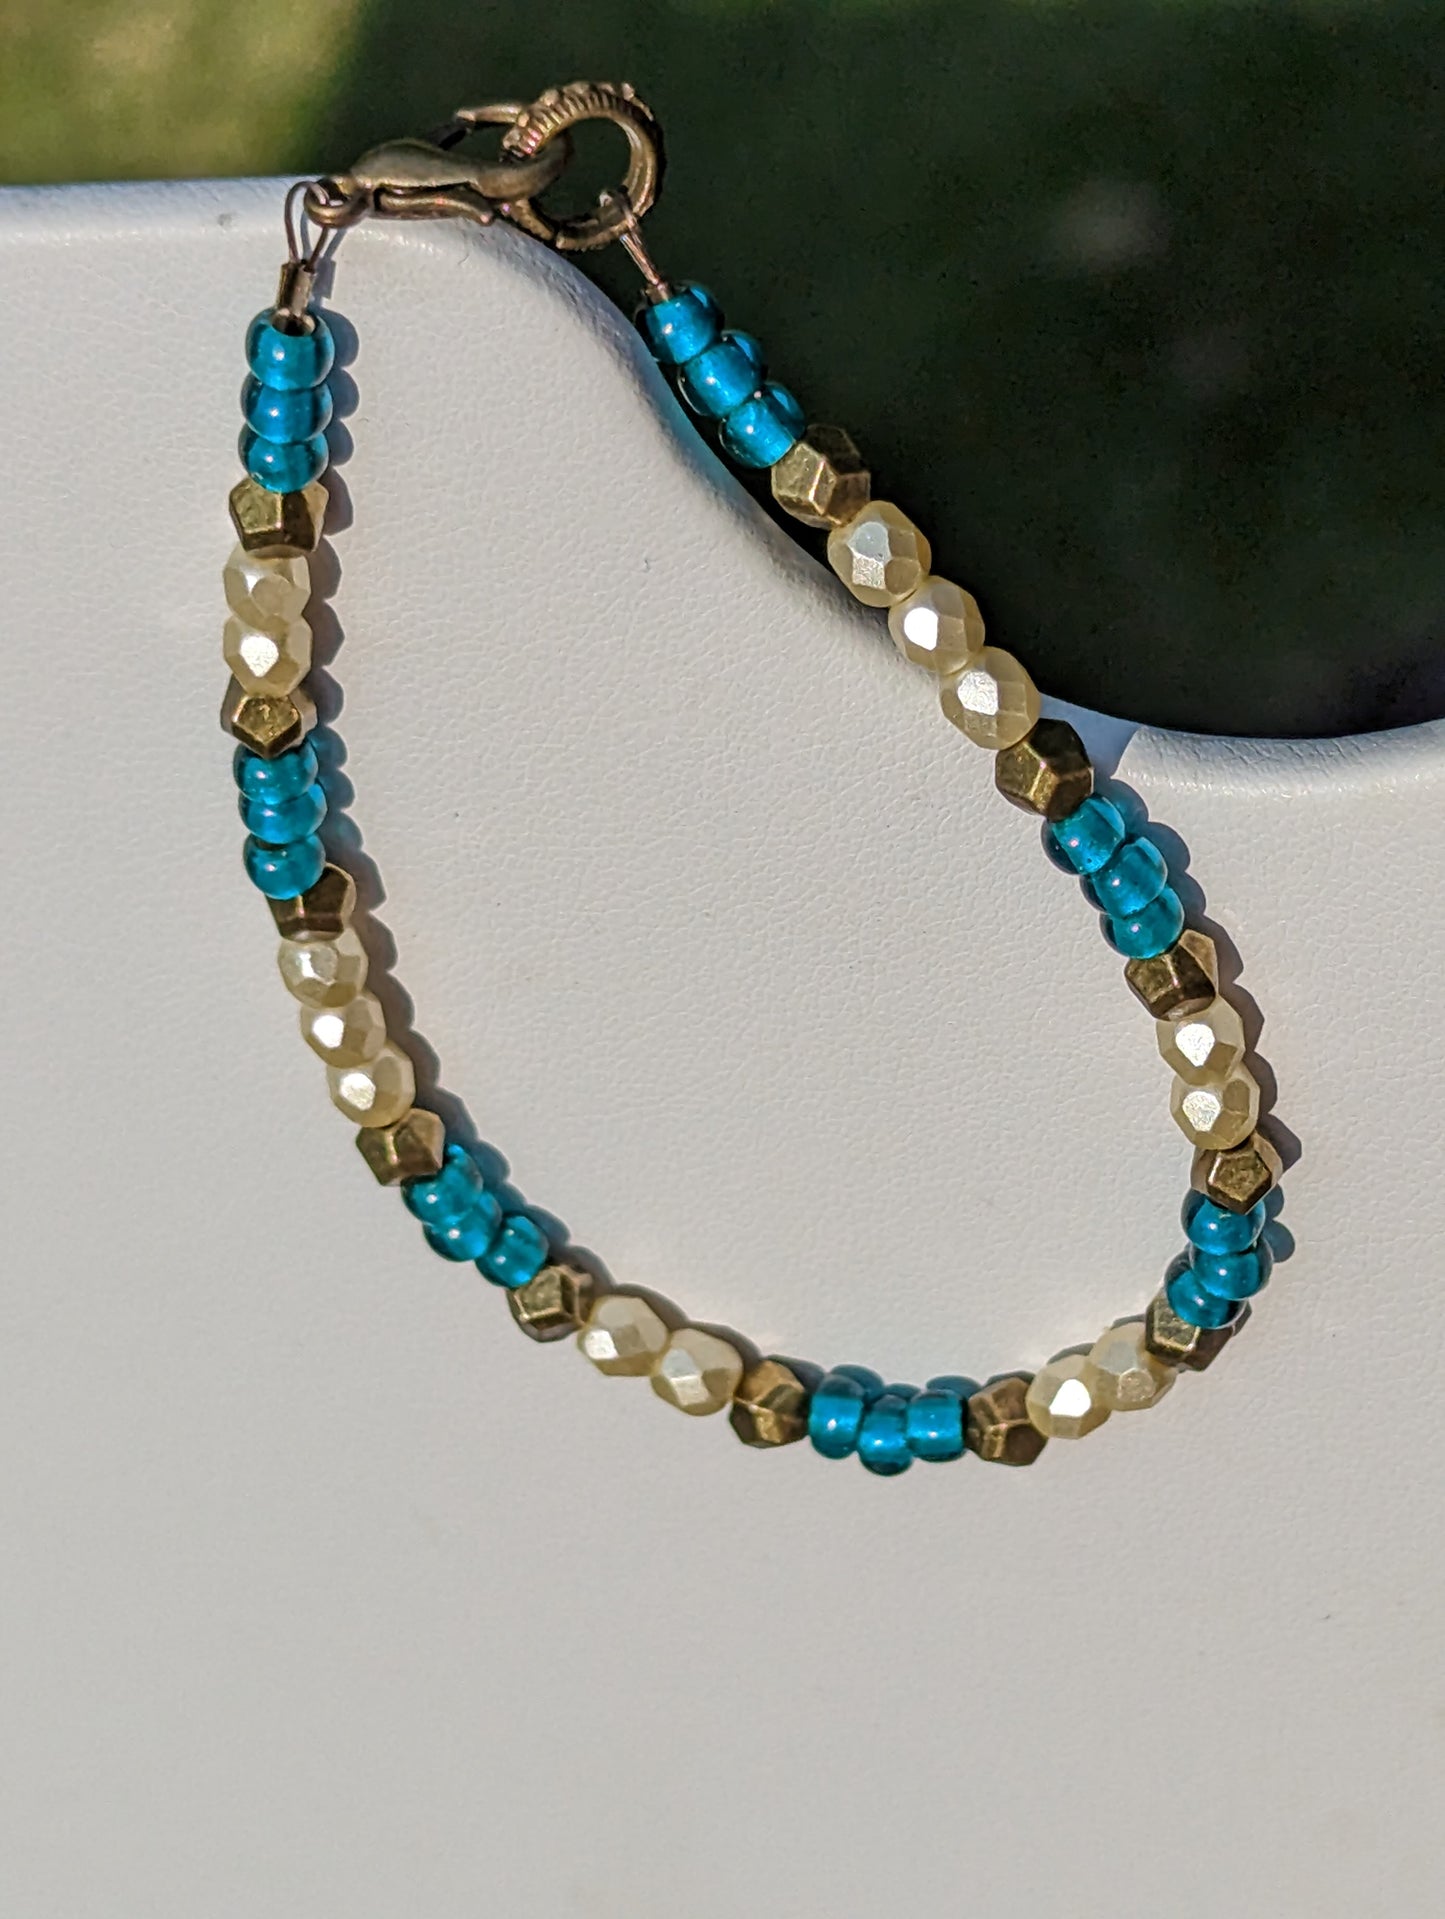 Bracelet with Teal, Pearlesque, and Brass Beads